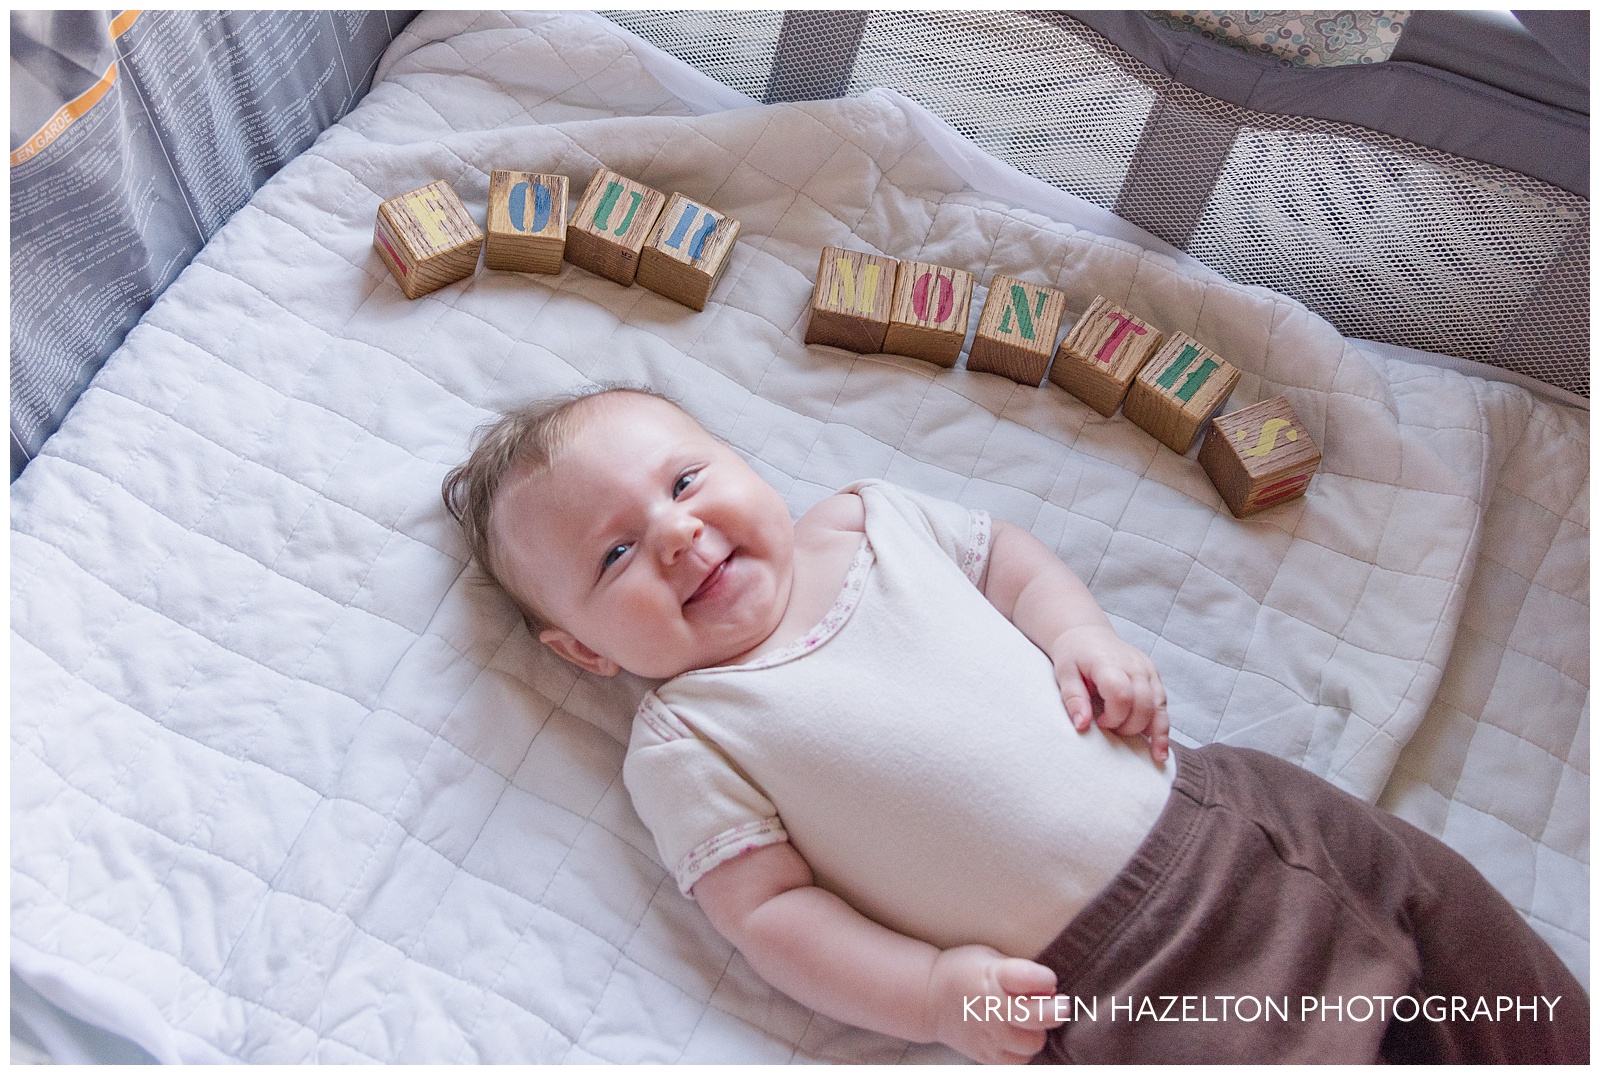 Smiling four month old baby with painted blocks